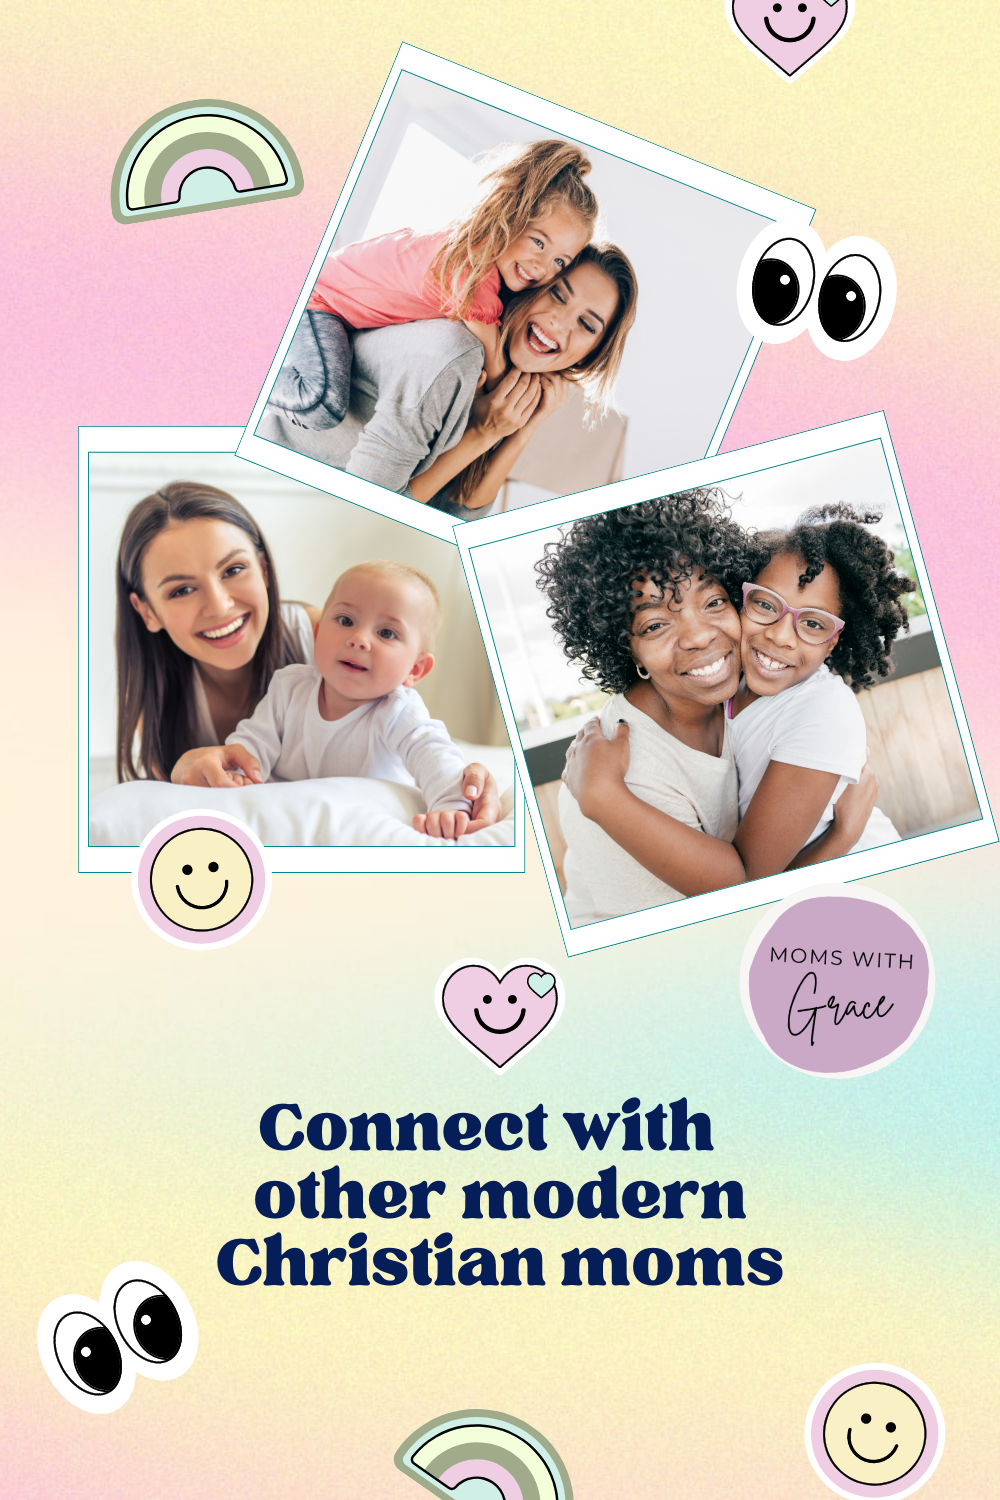 Connect with other Christian moms just like you!